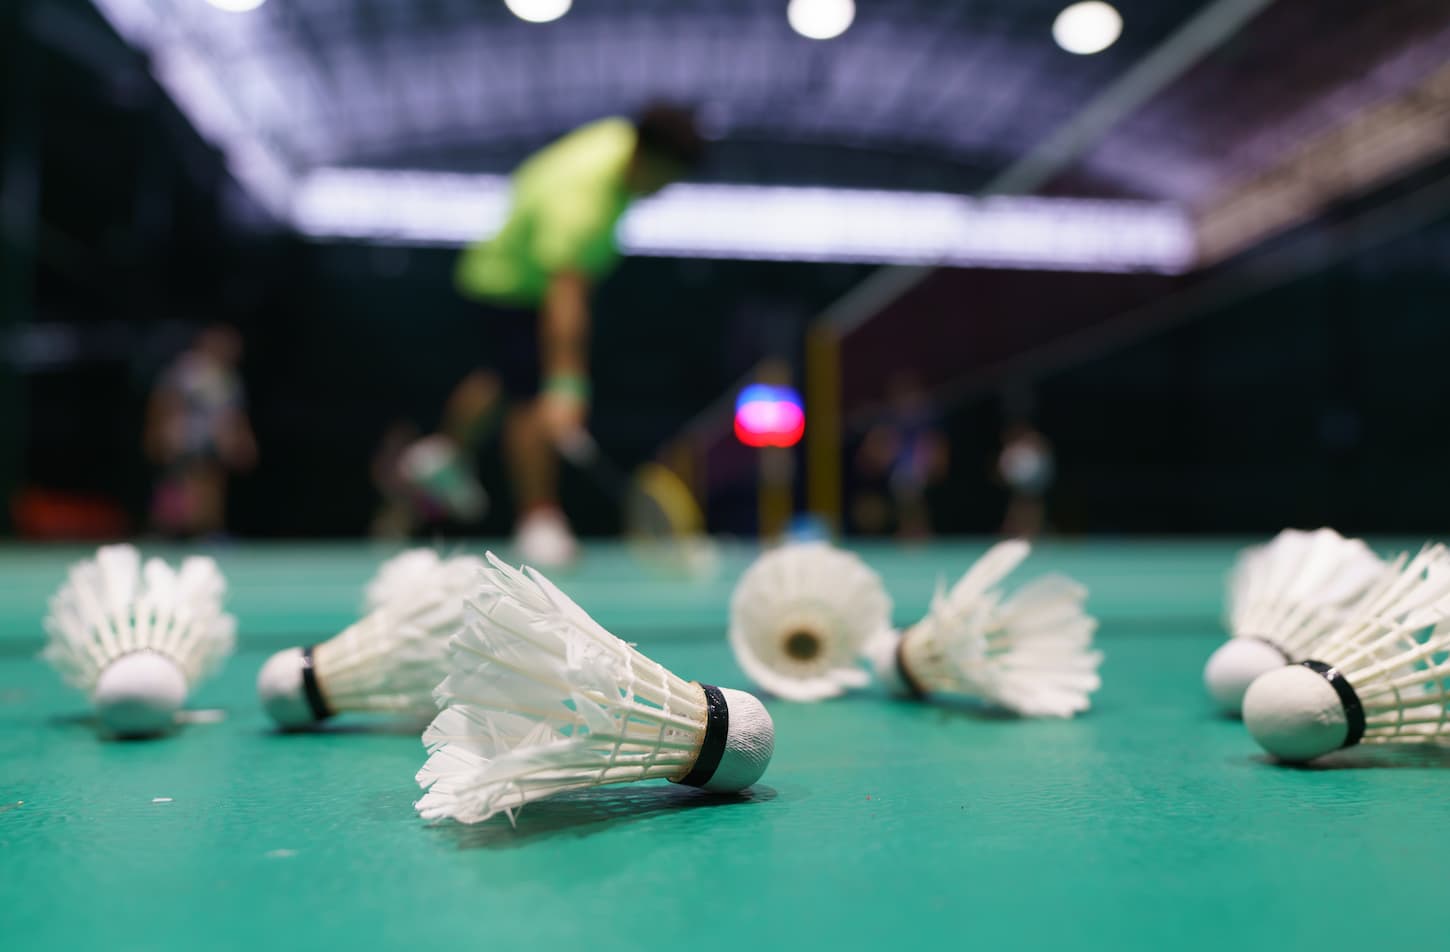 Badminton Equipment: What You Need (and what you don’t)